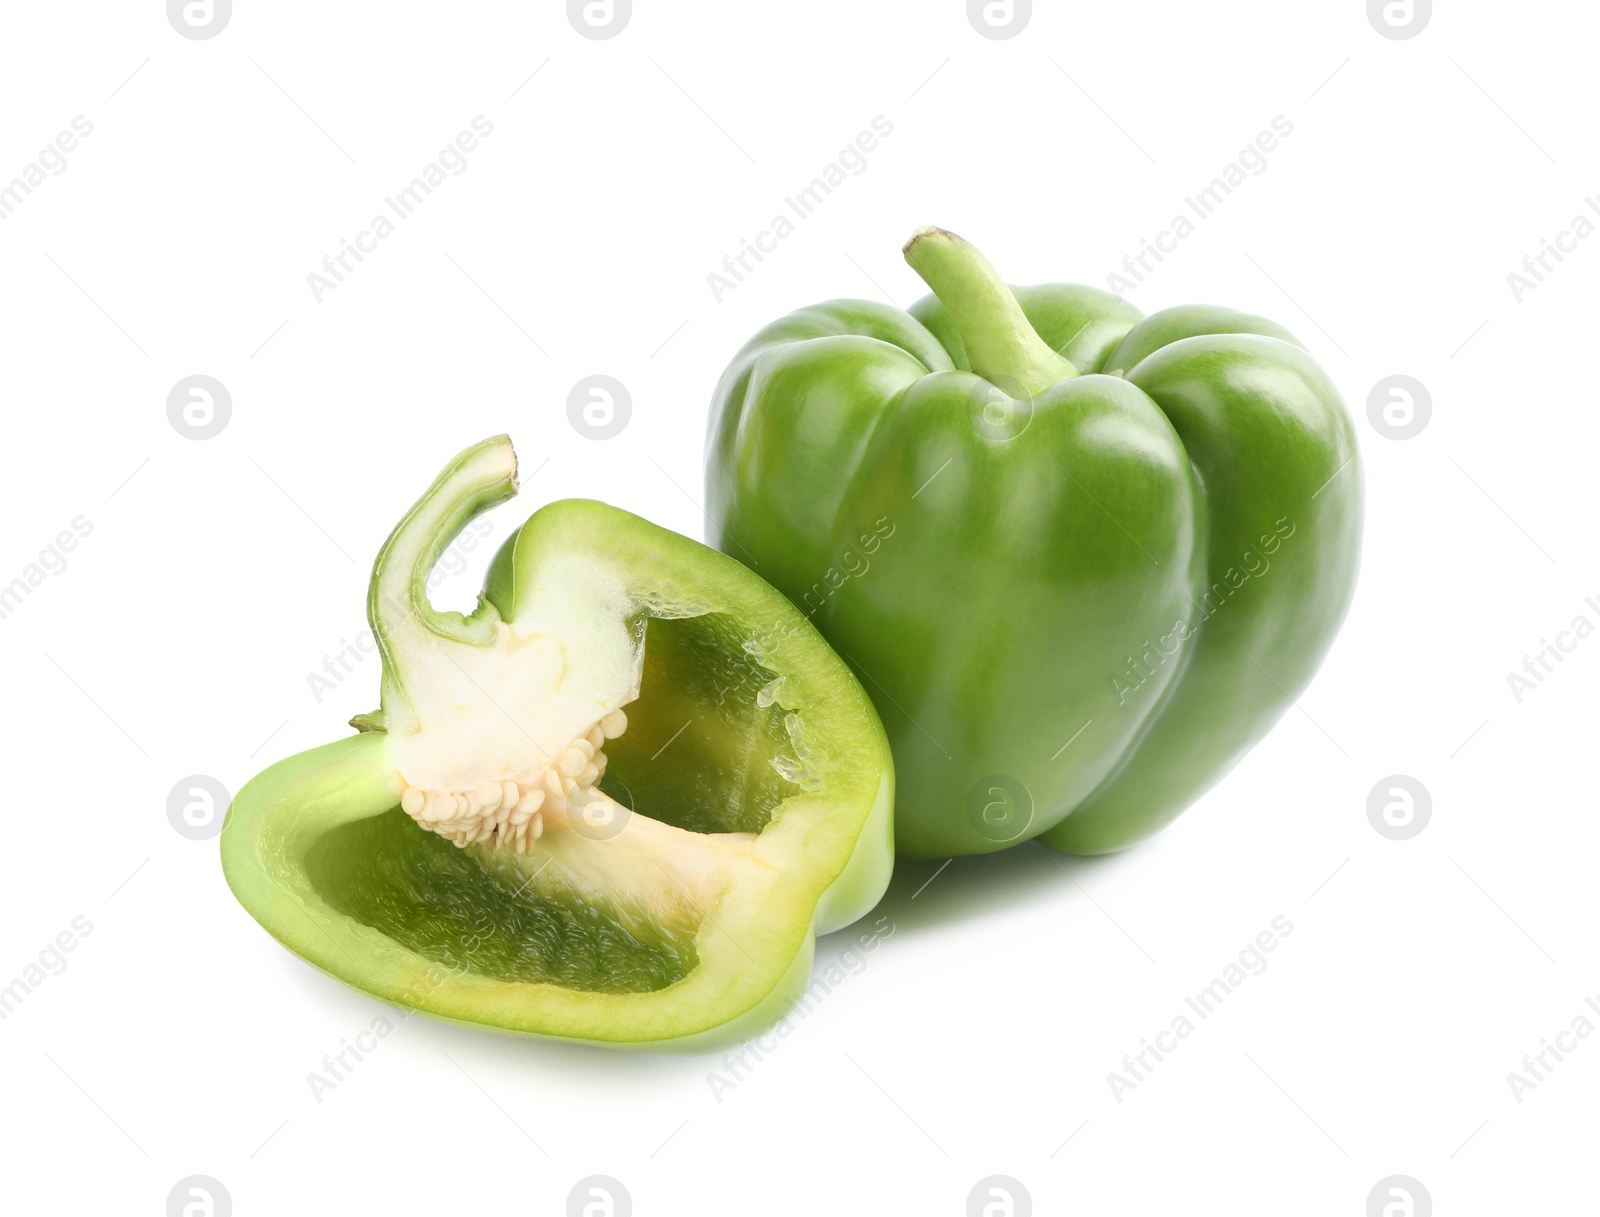 Photo of Cut and whole fresh green bell peppers isolated on white